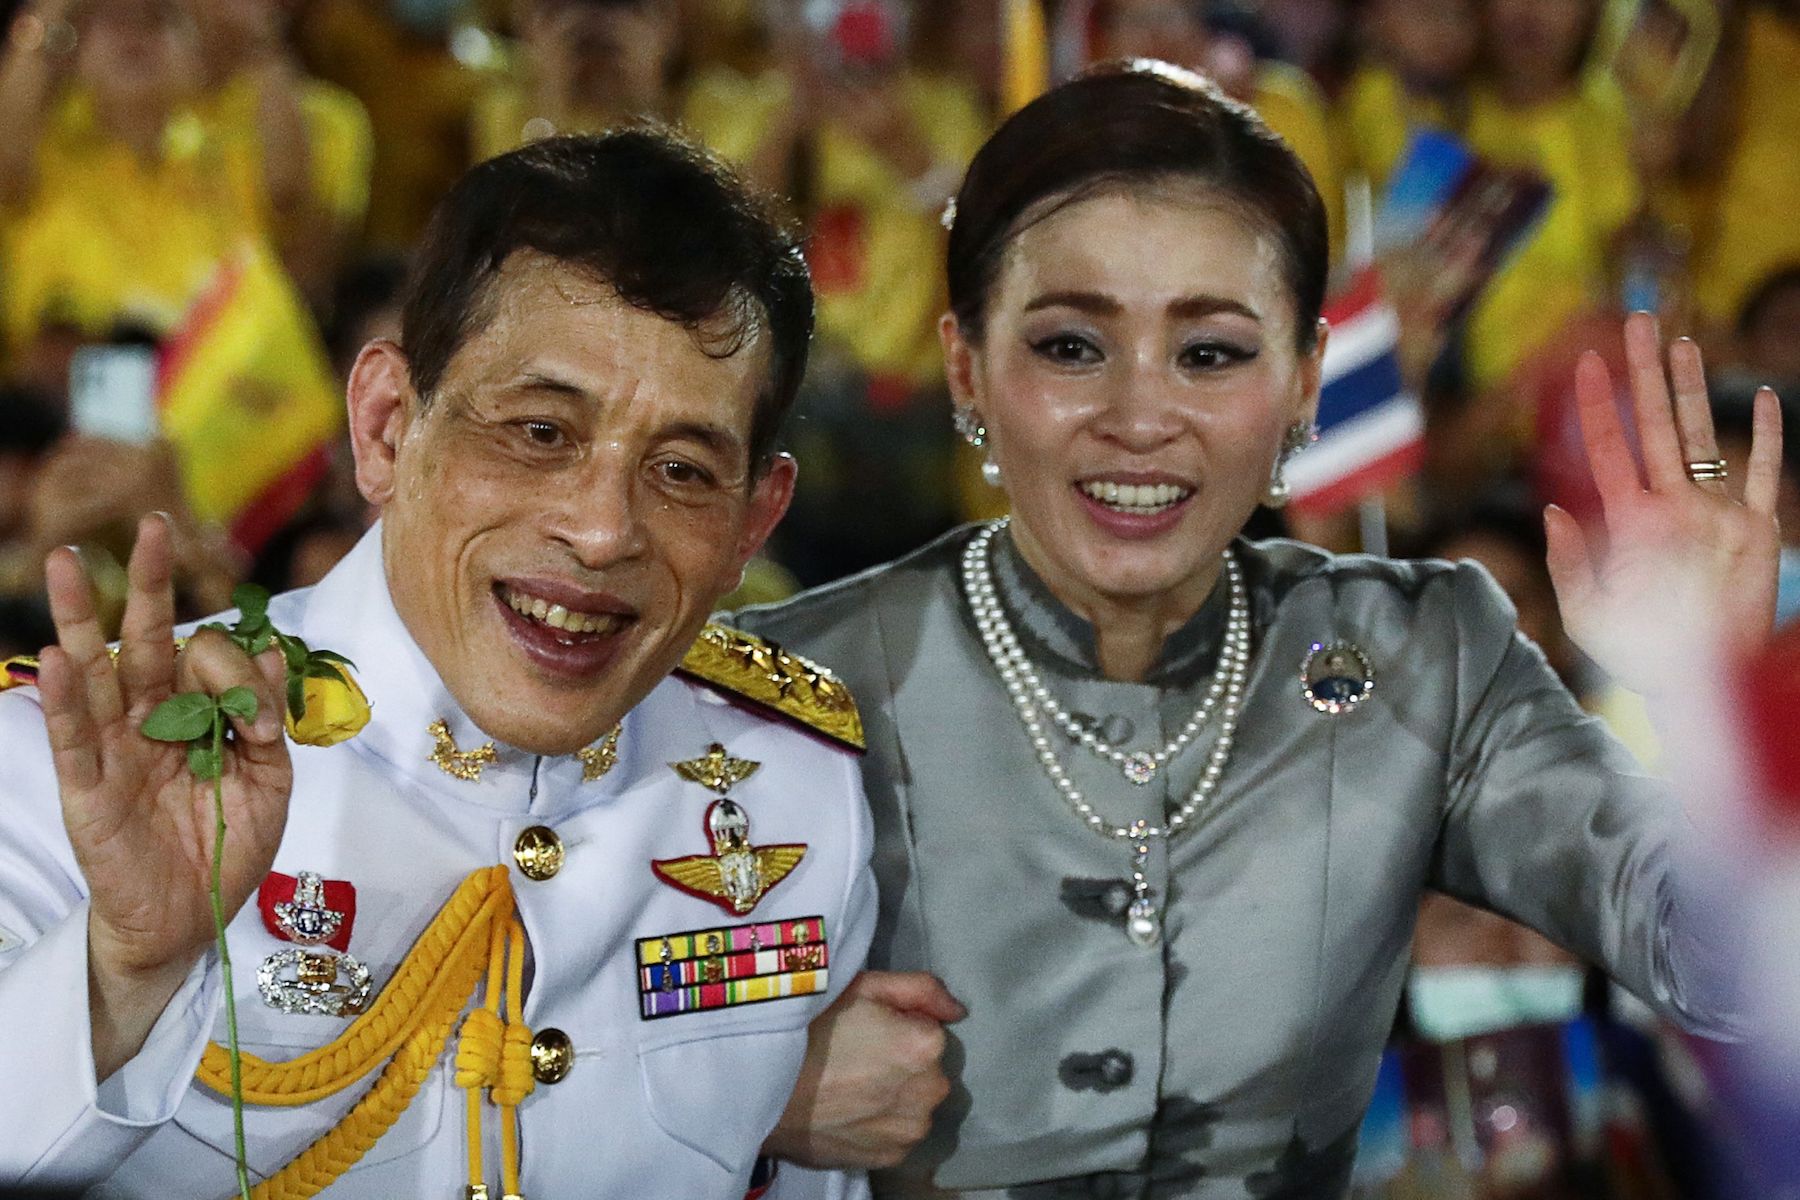 This Thai activist Has Been Jailed For 50 Years For Sharing Facebook Posts About The Monarchy